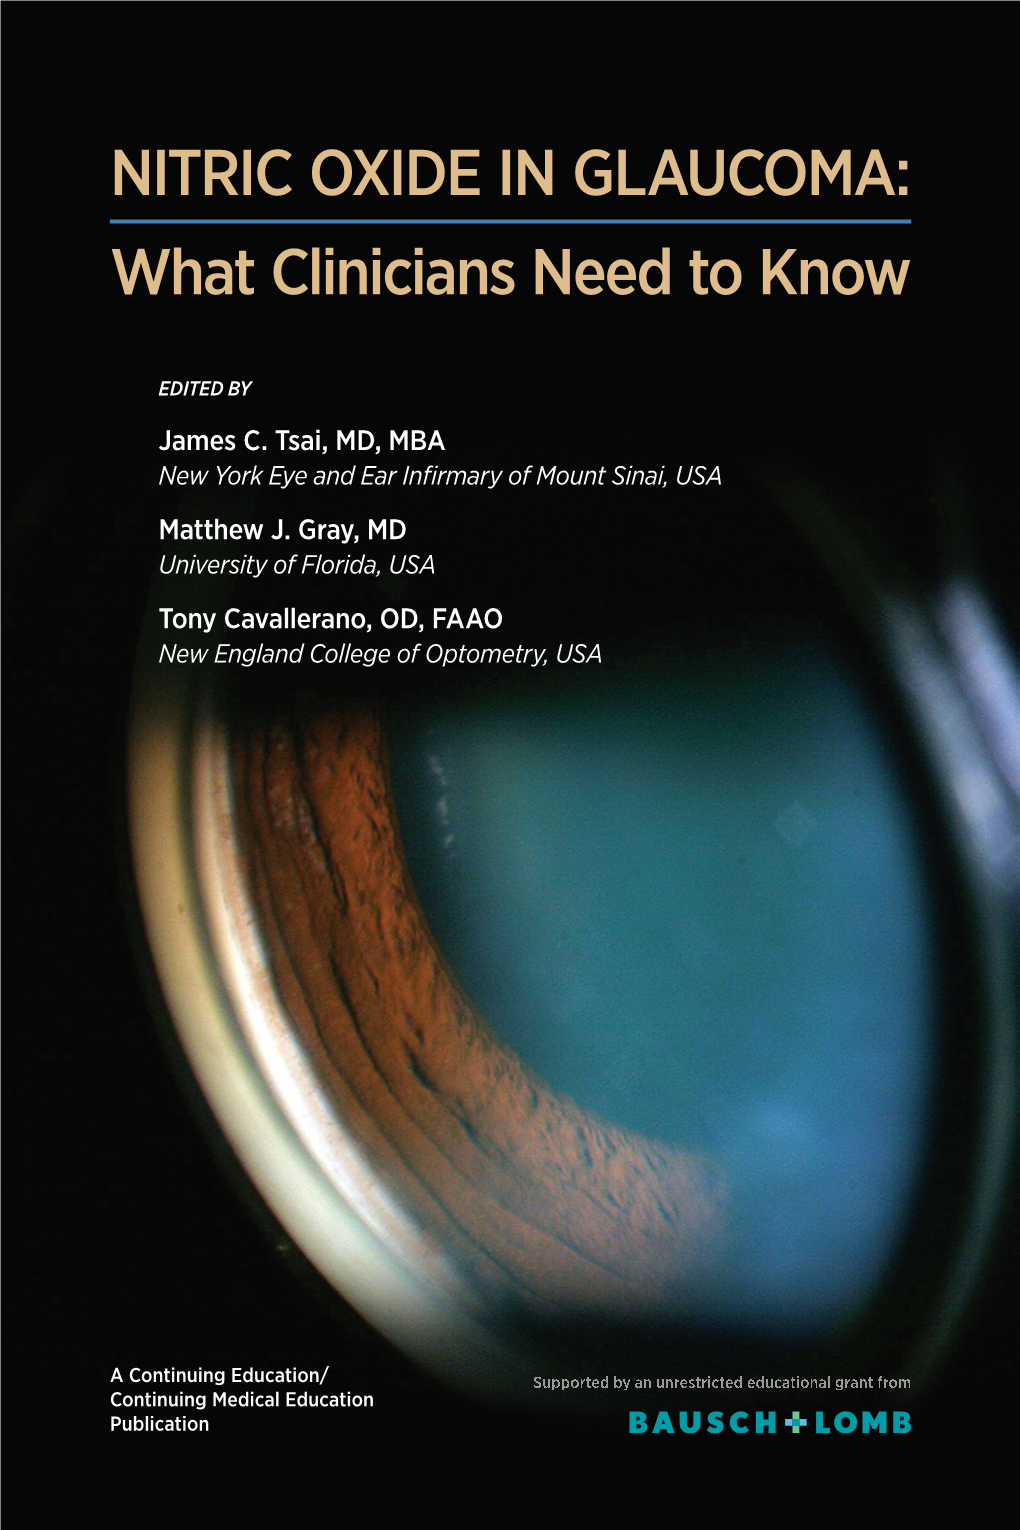 NITRIC OXIDE in GLAUCOMA: What Clinicians Need to Know